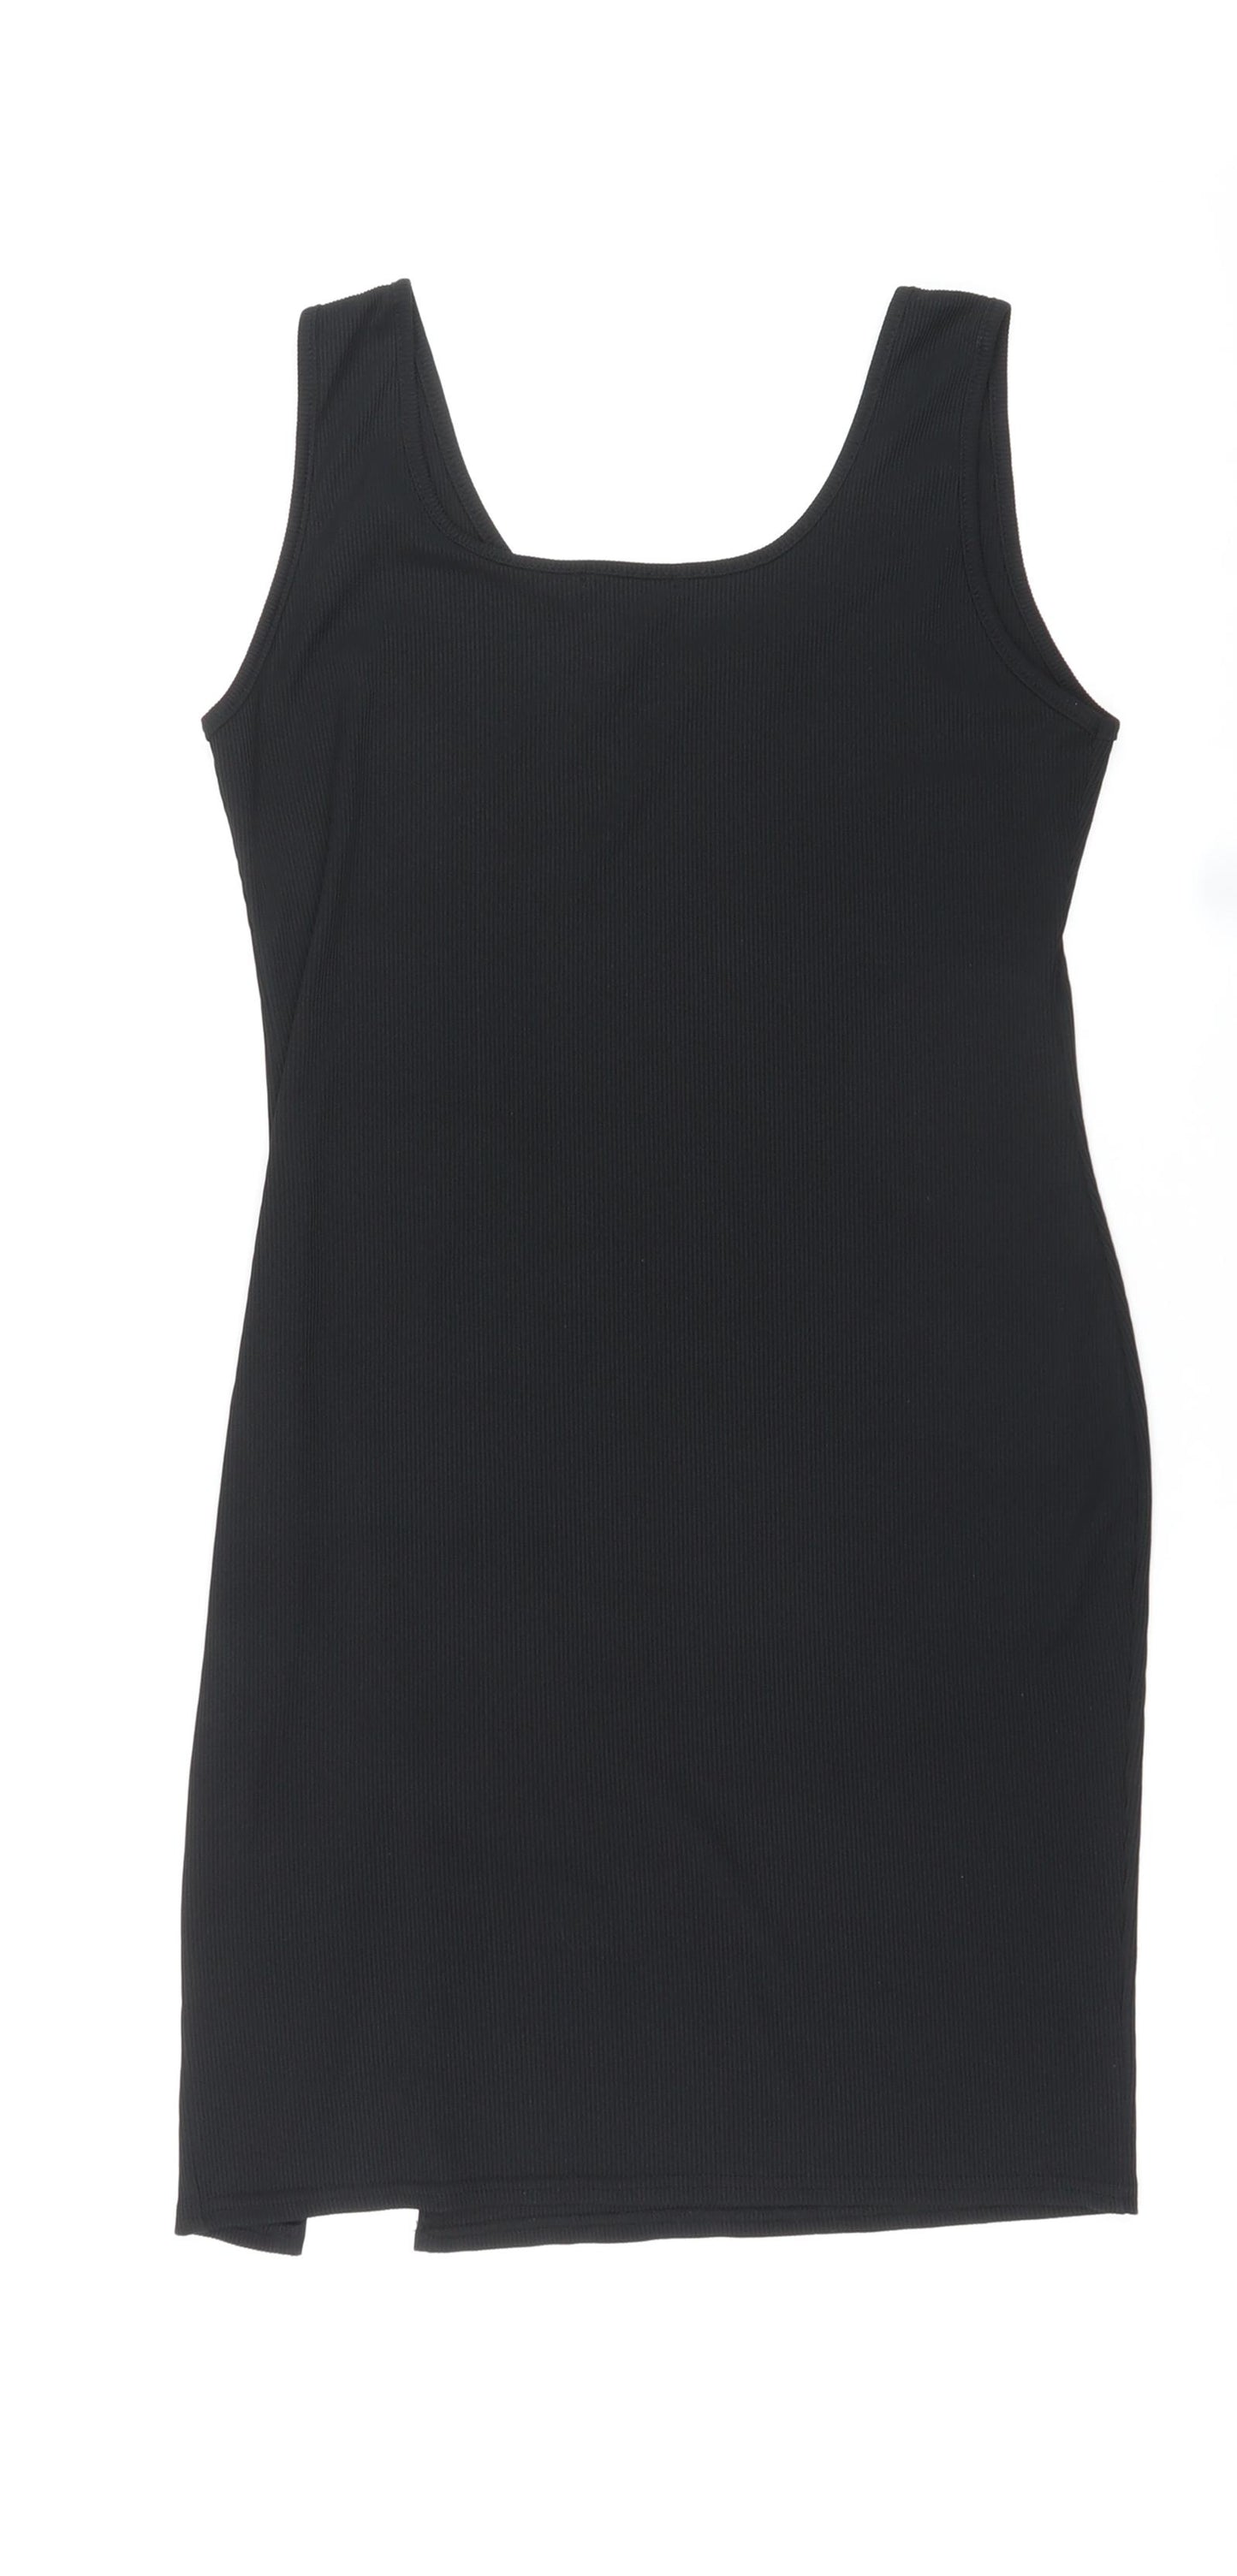 Boohoo Womens Black Polyester Pencil Dress Size 16 Scoop Neck Pullover